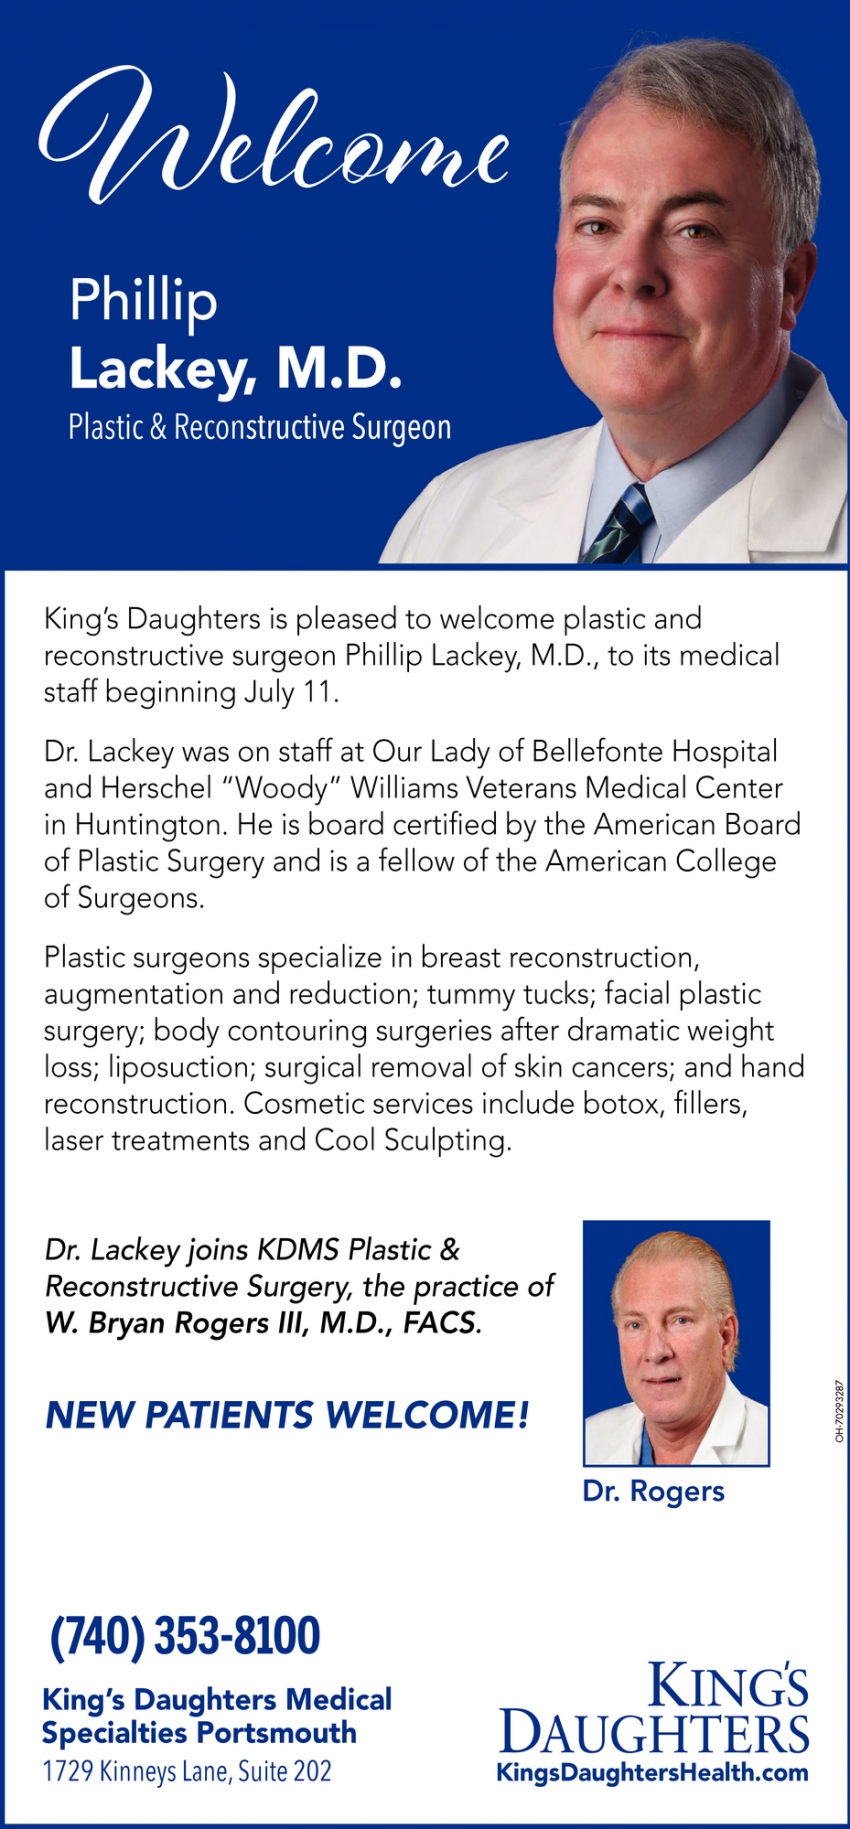 Welcome Phillip Lackey, M.D.